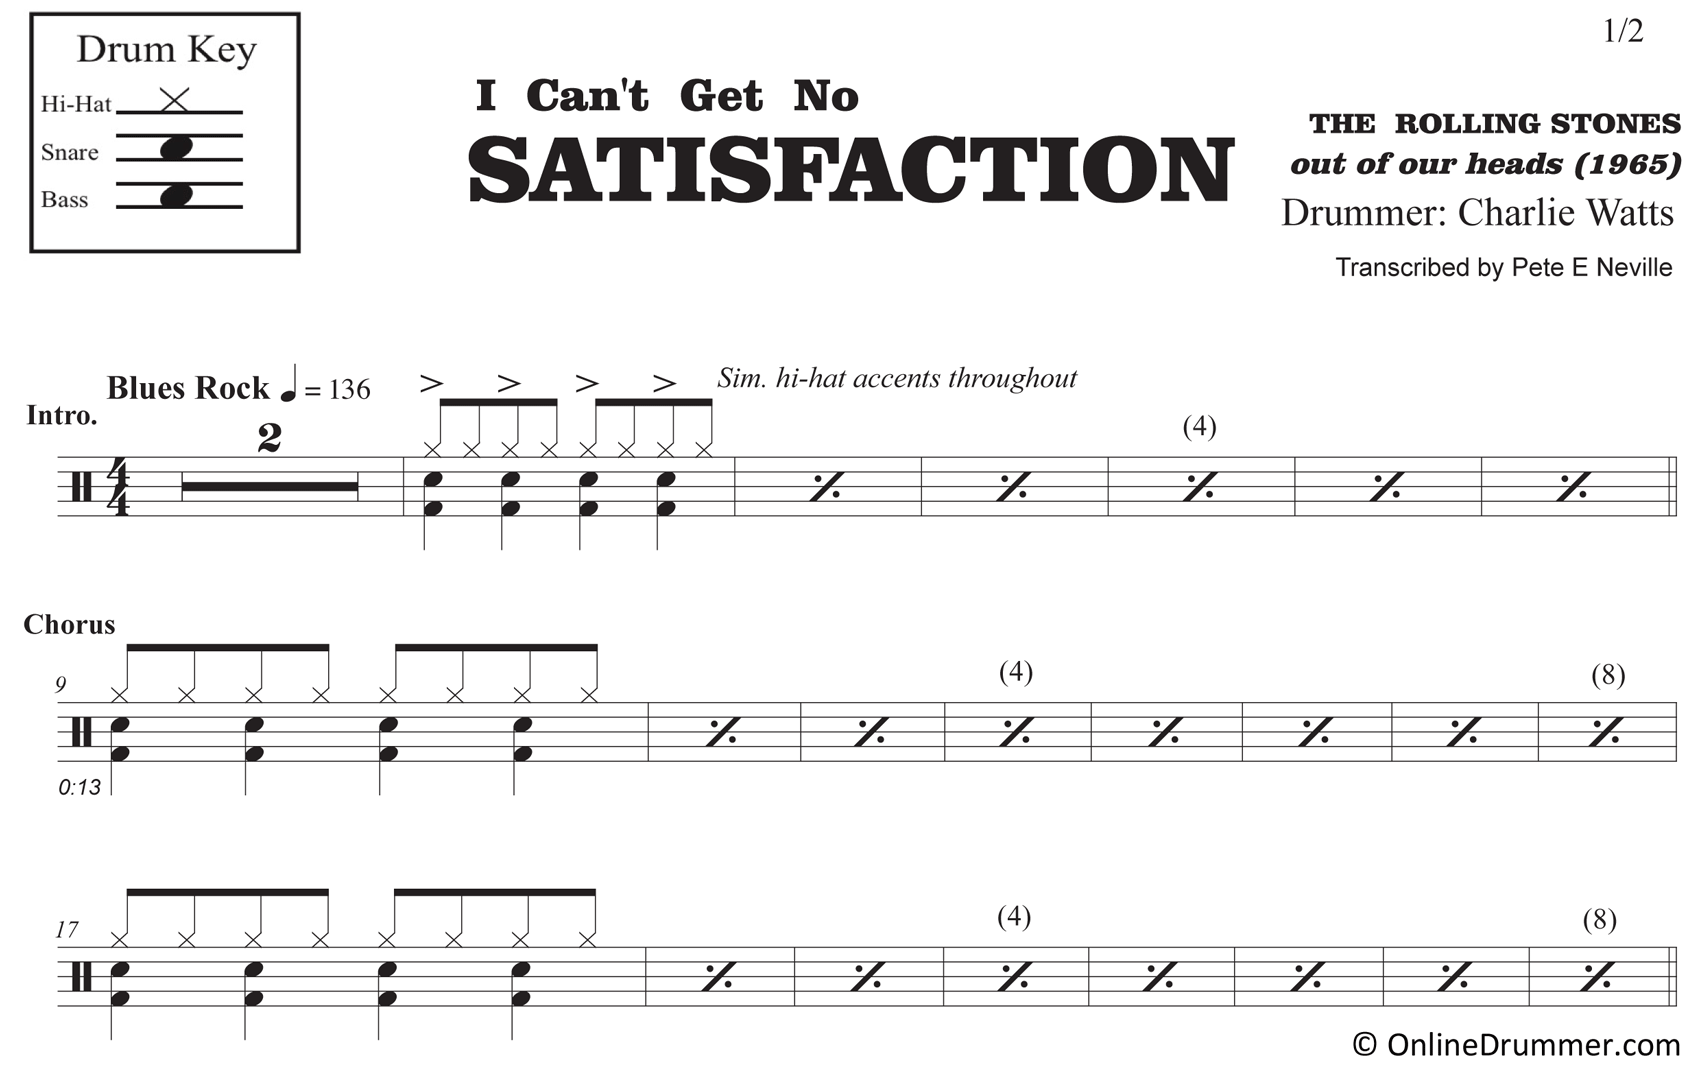 (I Can't Get No) Satisfaction - The Rolling Stones - Drum Sheet Music